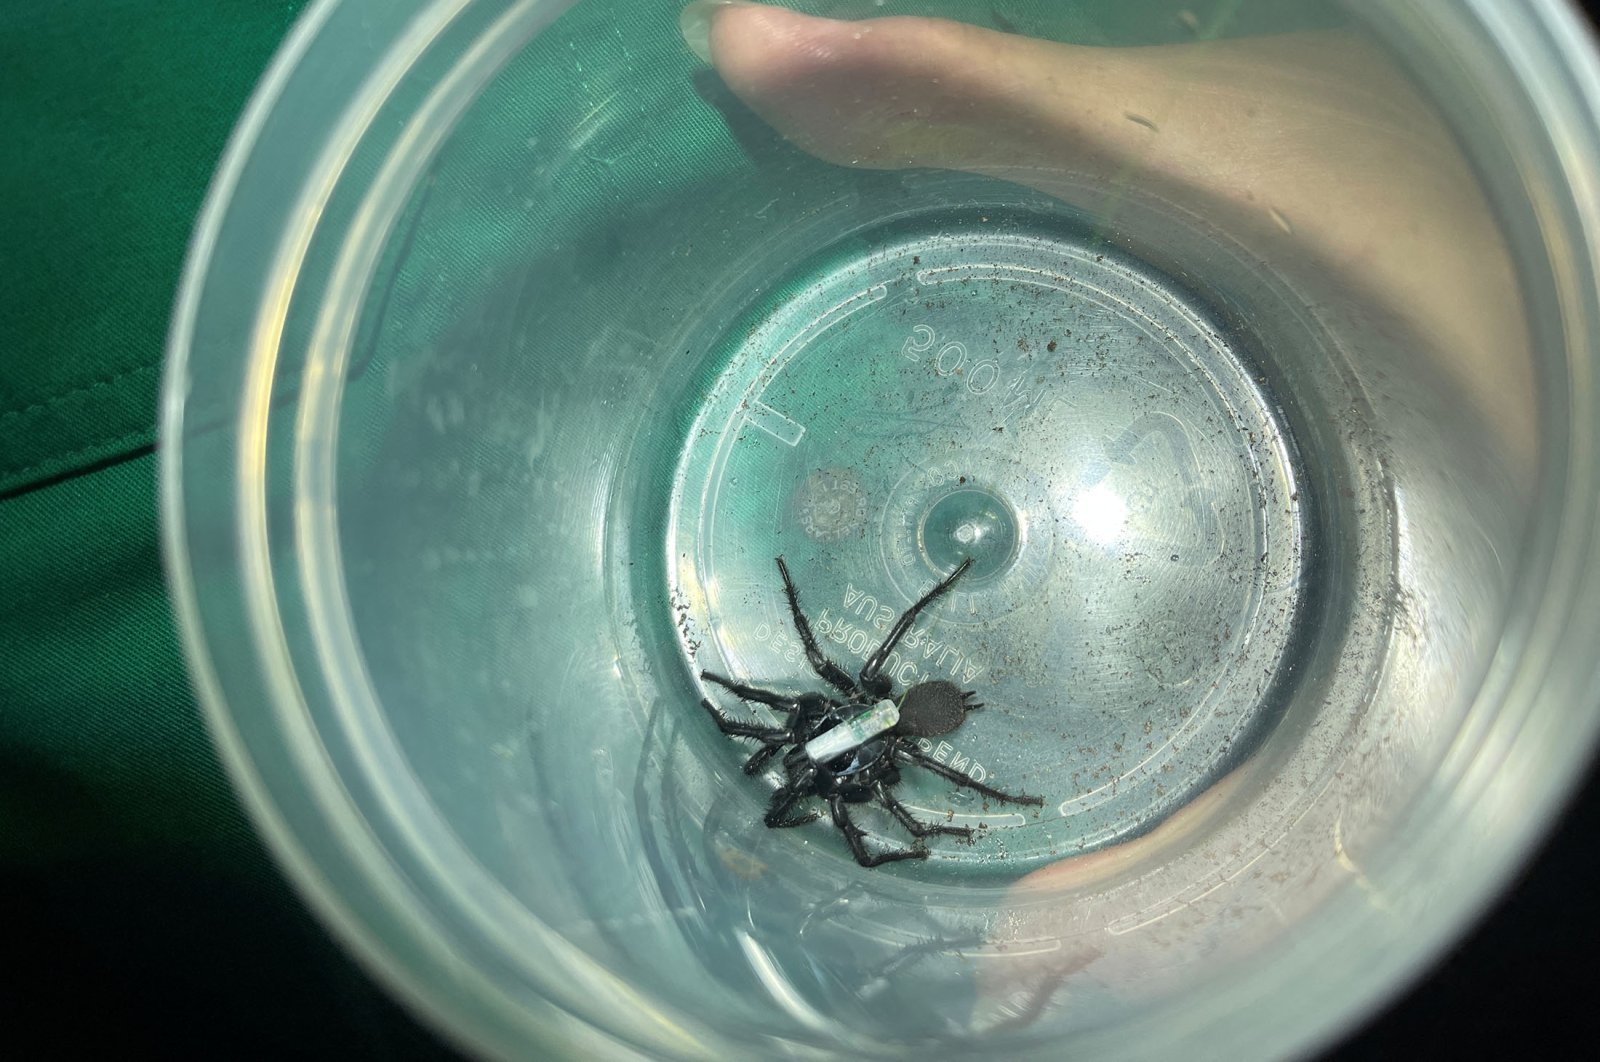 A male Sydney funnel-web spider with a telemetry tracker attached waits in a container to be released back into the bushland by Caitlin Creak, Sydney, Australia, Feb. 18, 2022. (Reuters Photo)